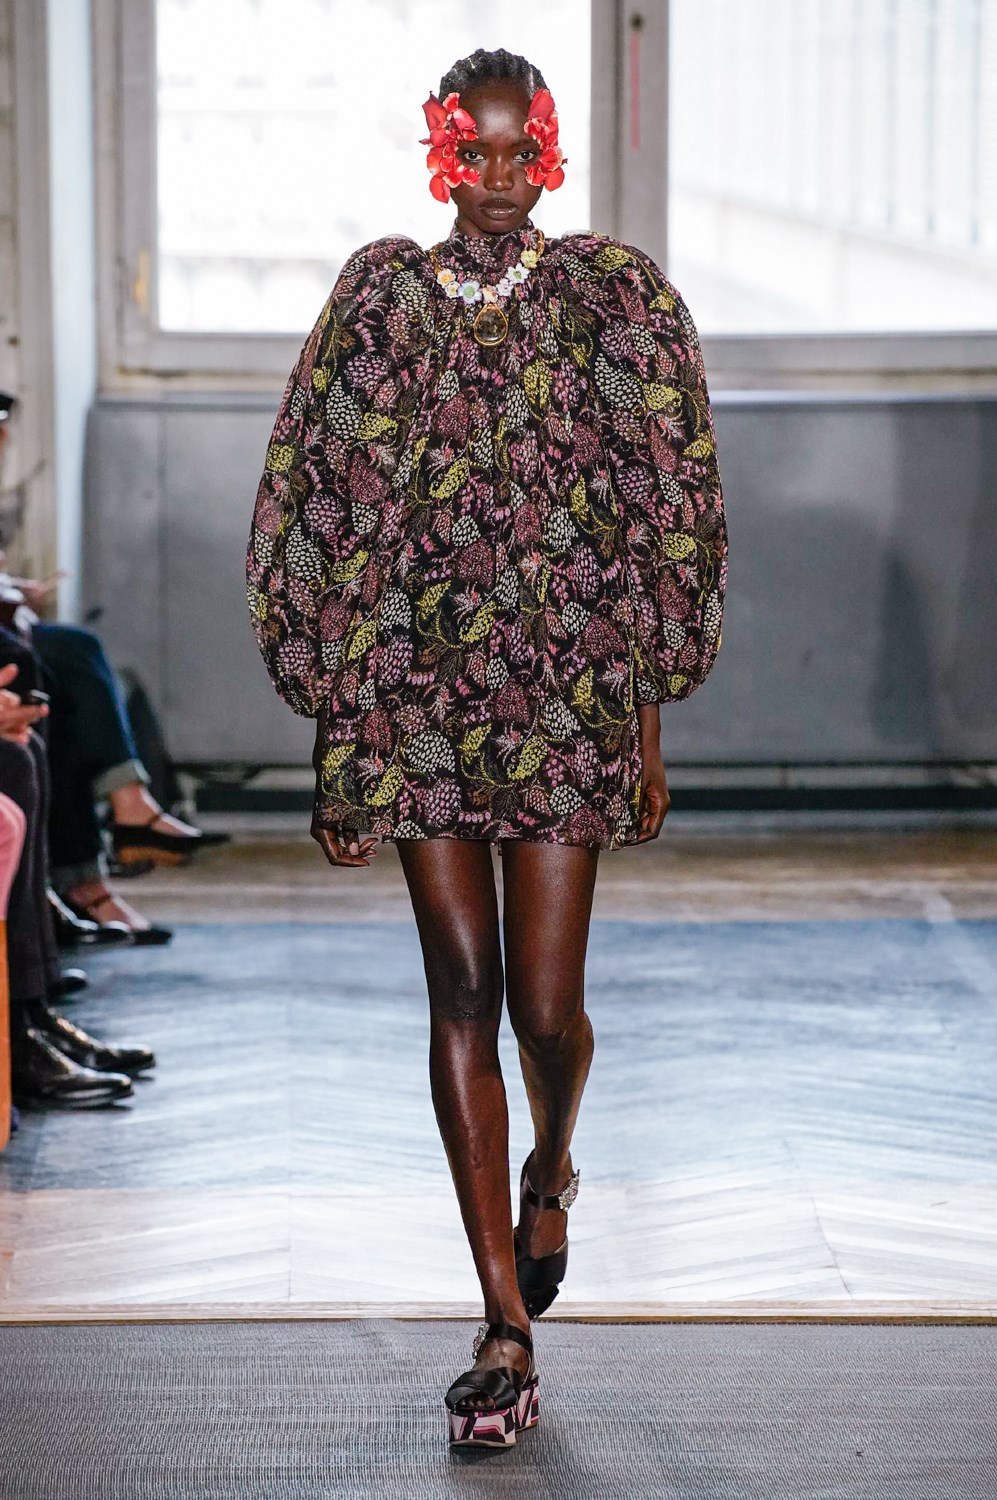 Top 15 Breakout Runway Models of Spring 2020 | The Impression